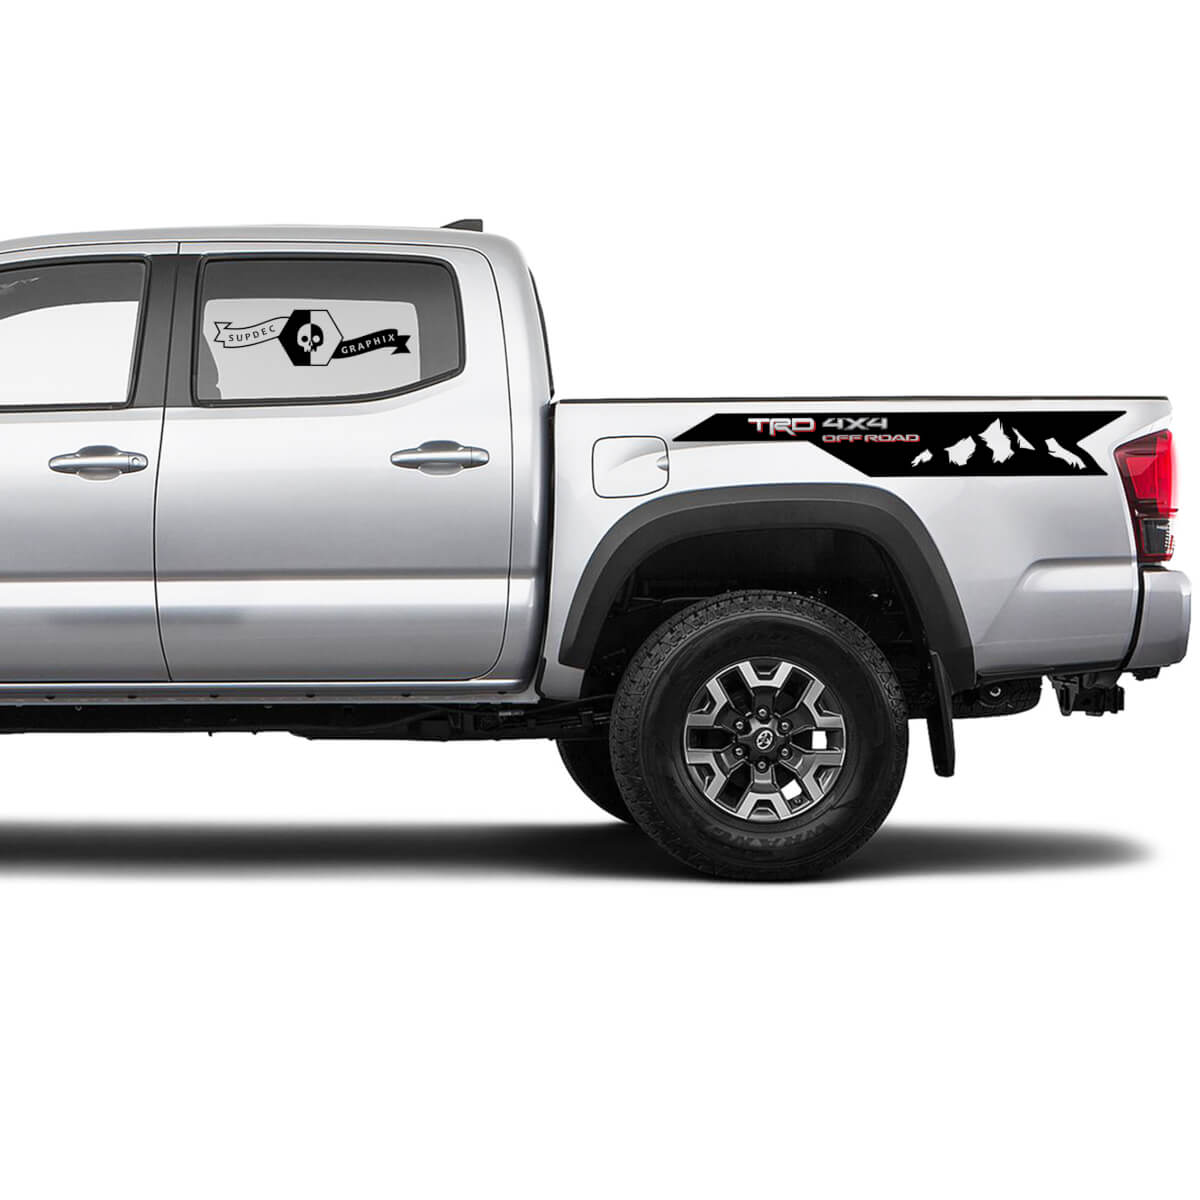 2 Tacoma 2 Colors Side Bed Mountains TRD 4x4 Off-Road Vinyl Stickers Decal Kit for Toyota Tacoma